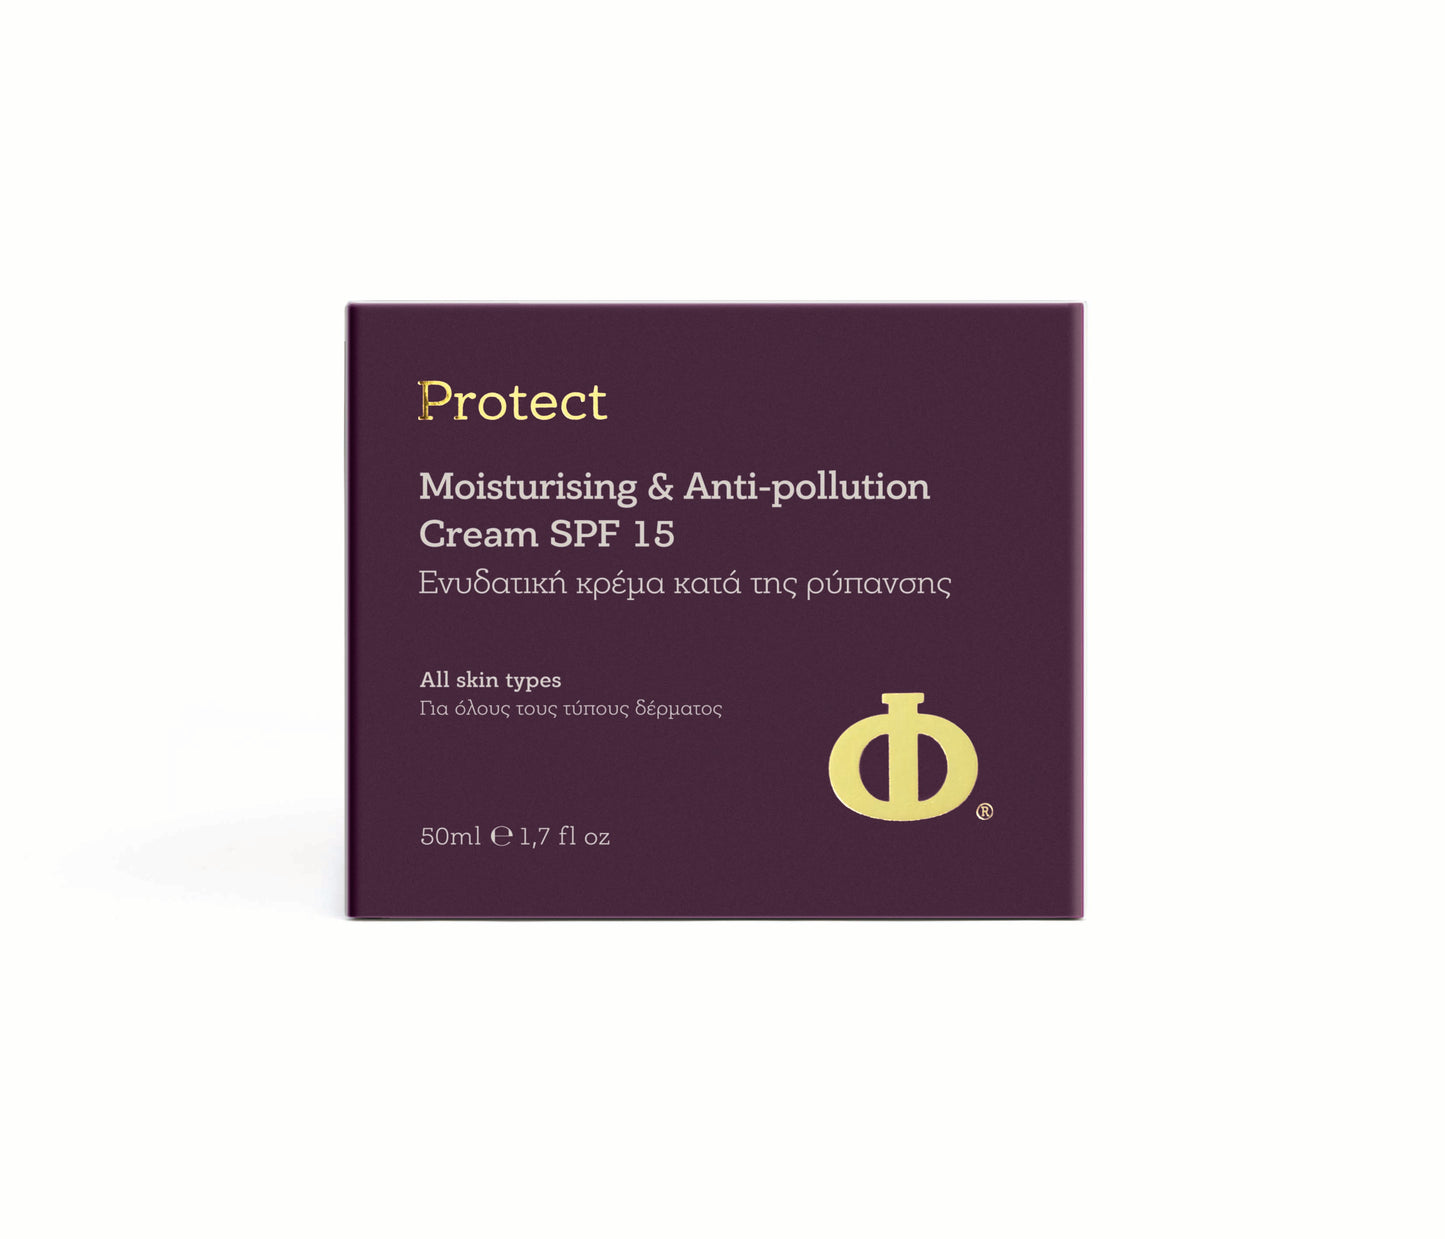 Philab Moisturising Cream SPF15 packaging with purple background and gold logo.